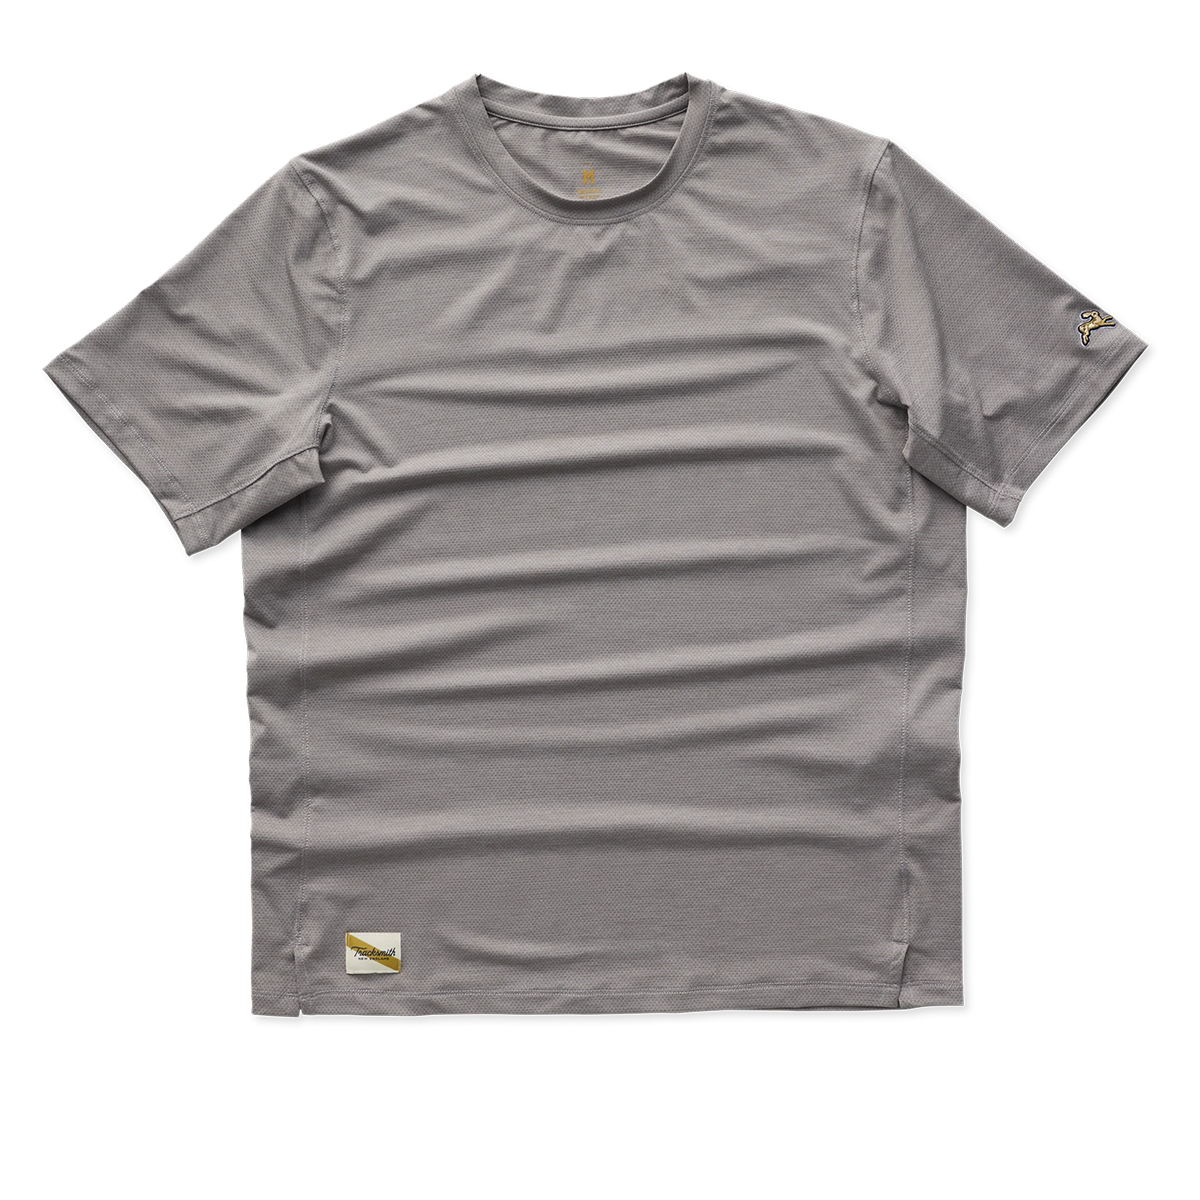 Session Tee - Frost Grey Men